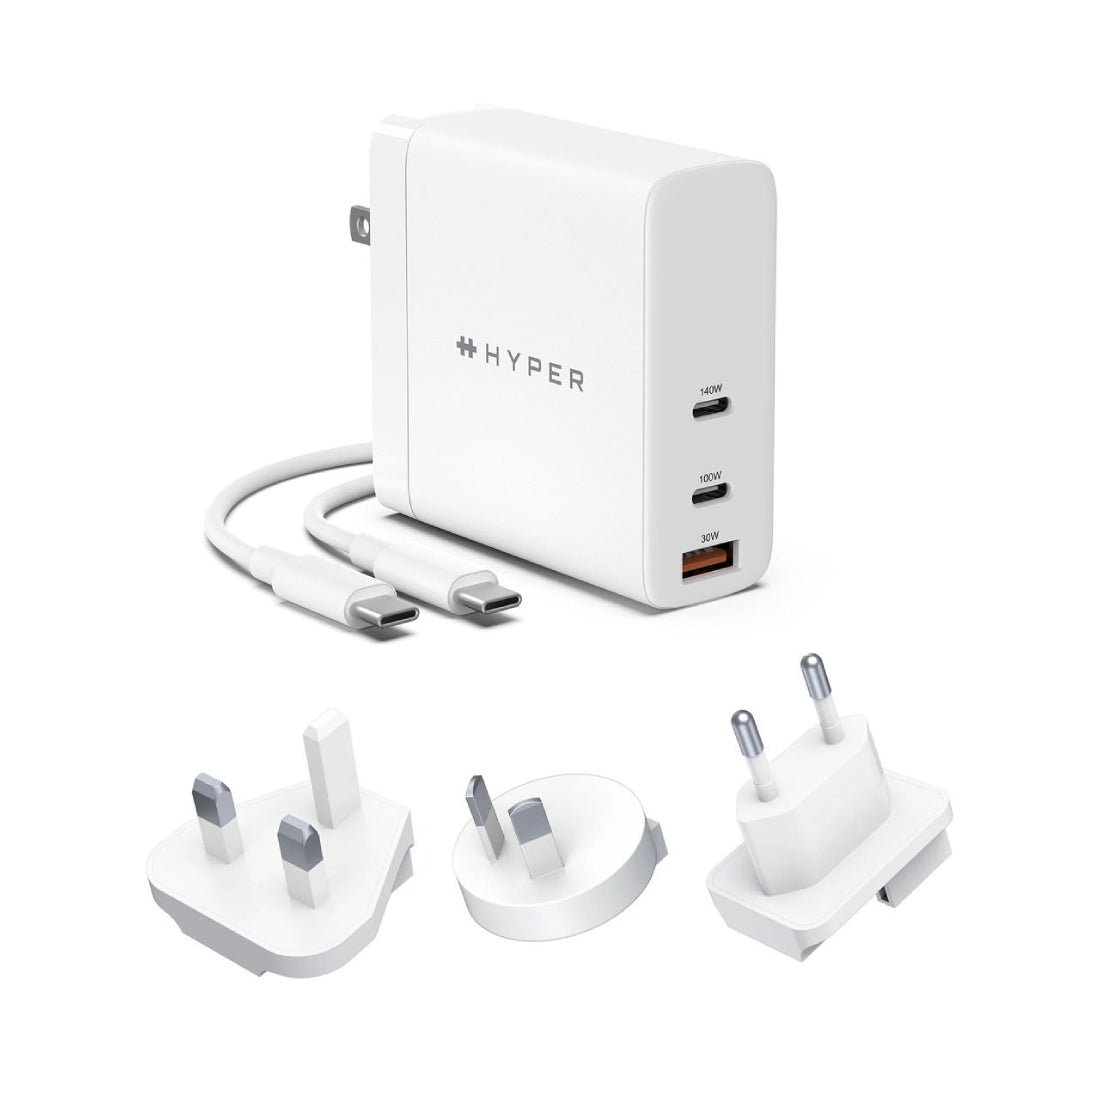 Hyper HyperJuice 140W PD 3.1 USB-C GaN Charger With Adapters - شاحن - Store 974 | ستور ٩٧٤